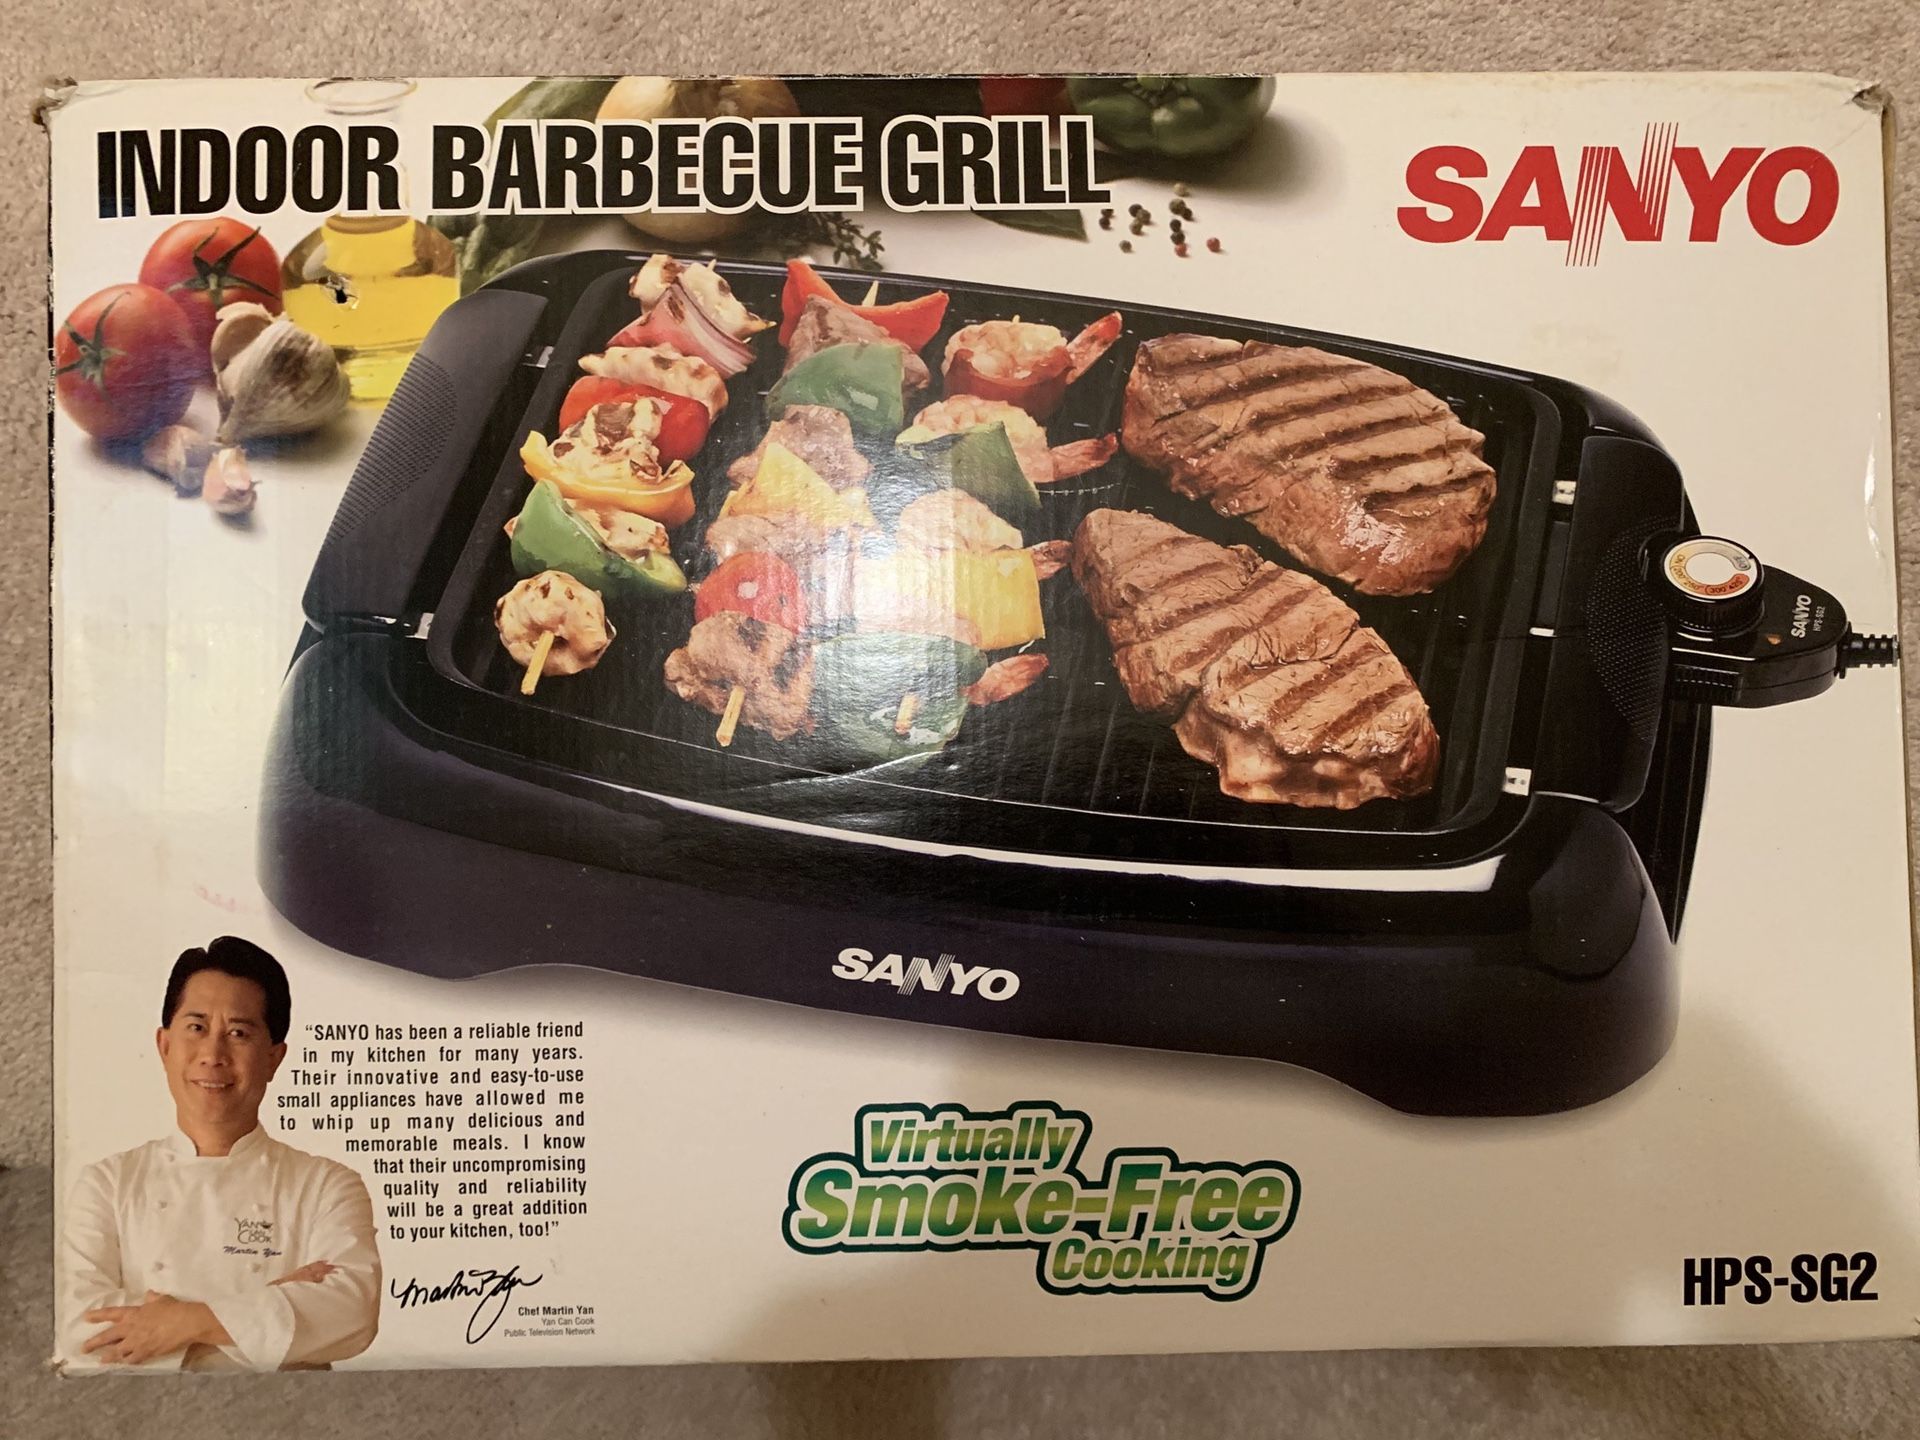 Sanyo indoor barbecue grill like new